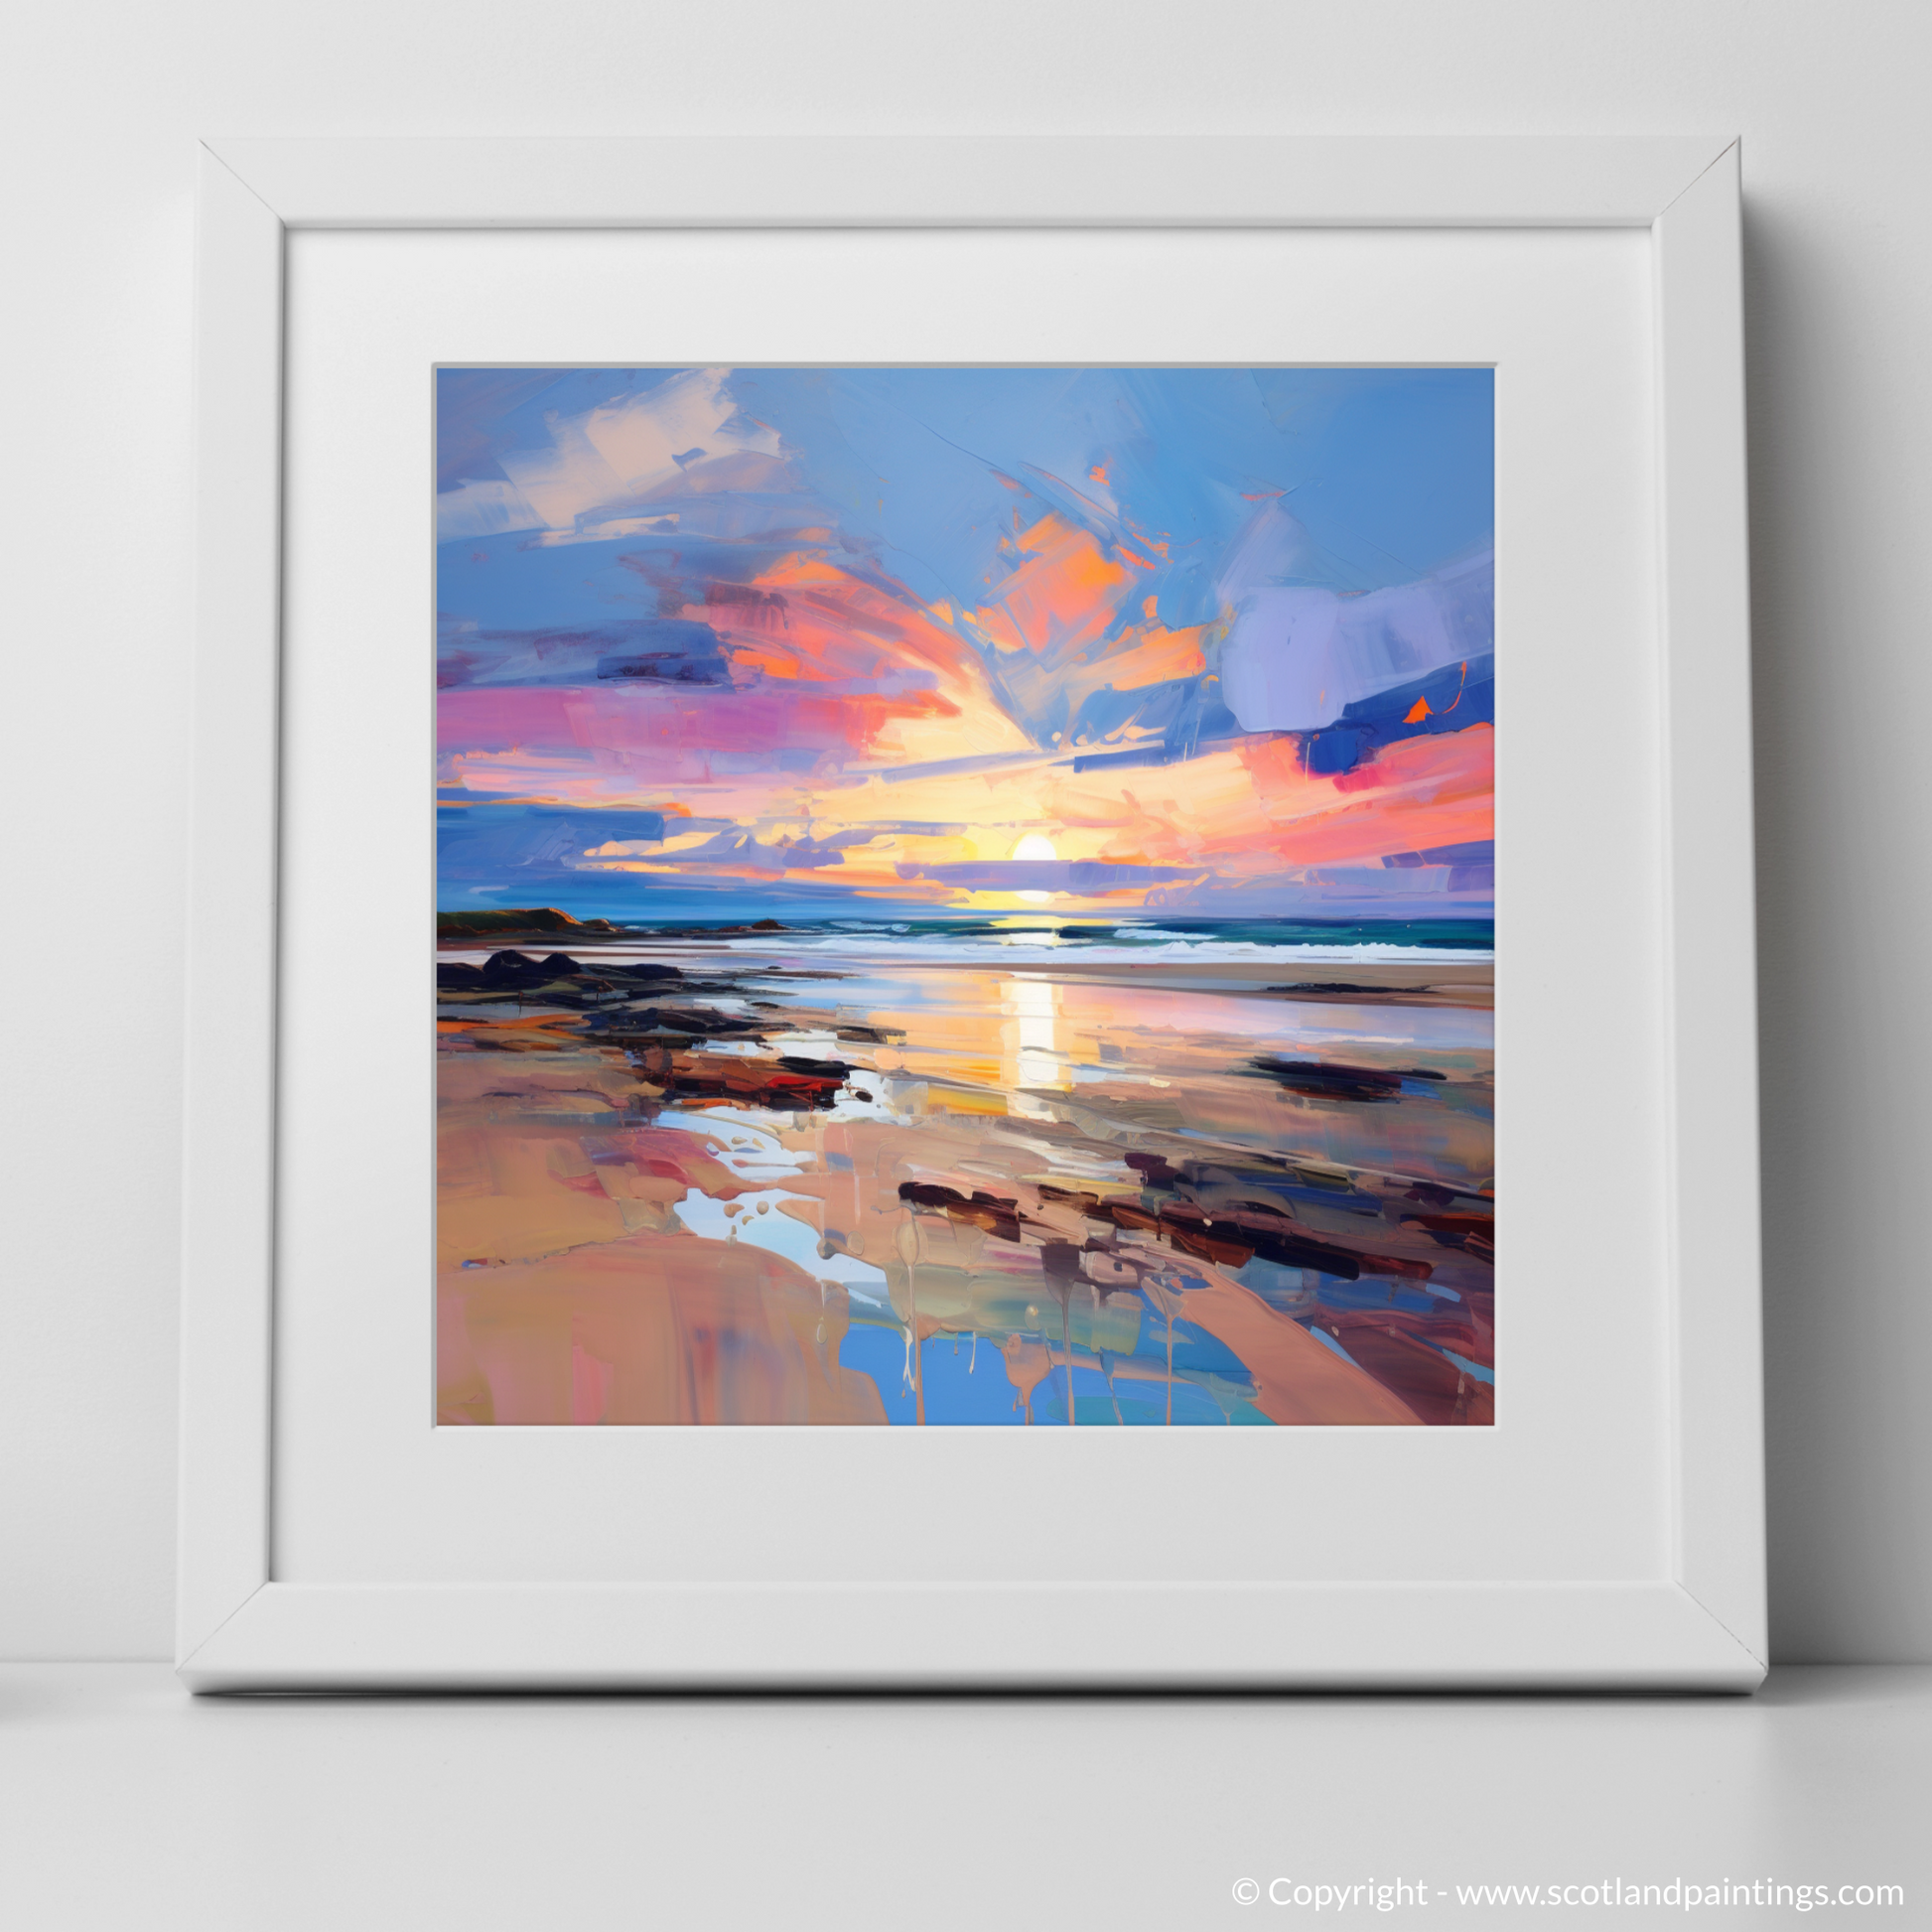 Art Print of St Cyrus Beach at sunset with a white frame